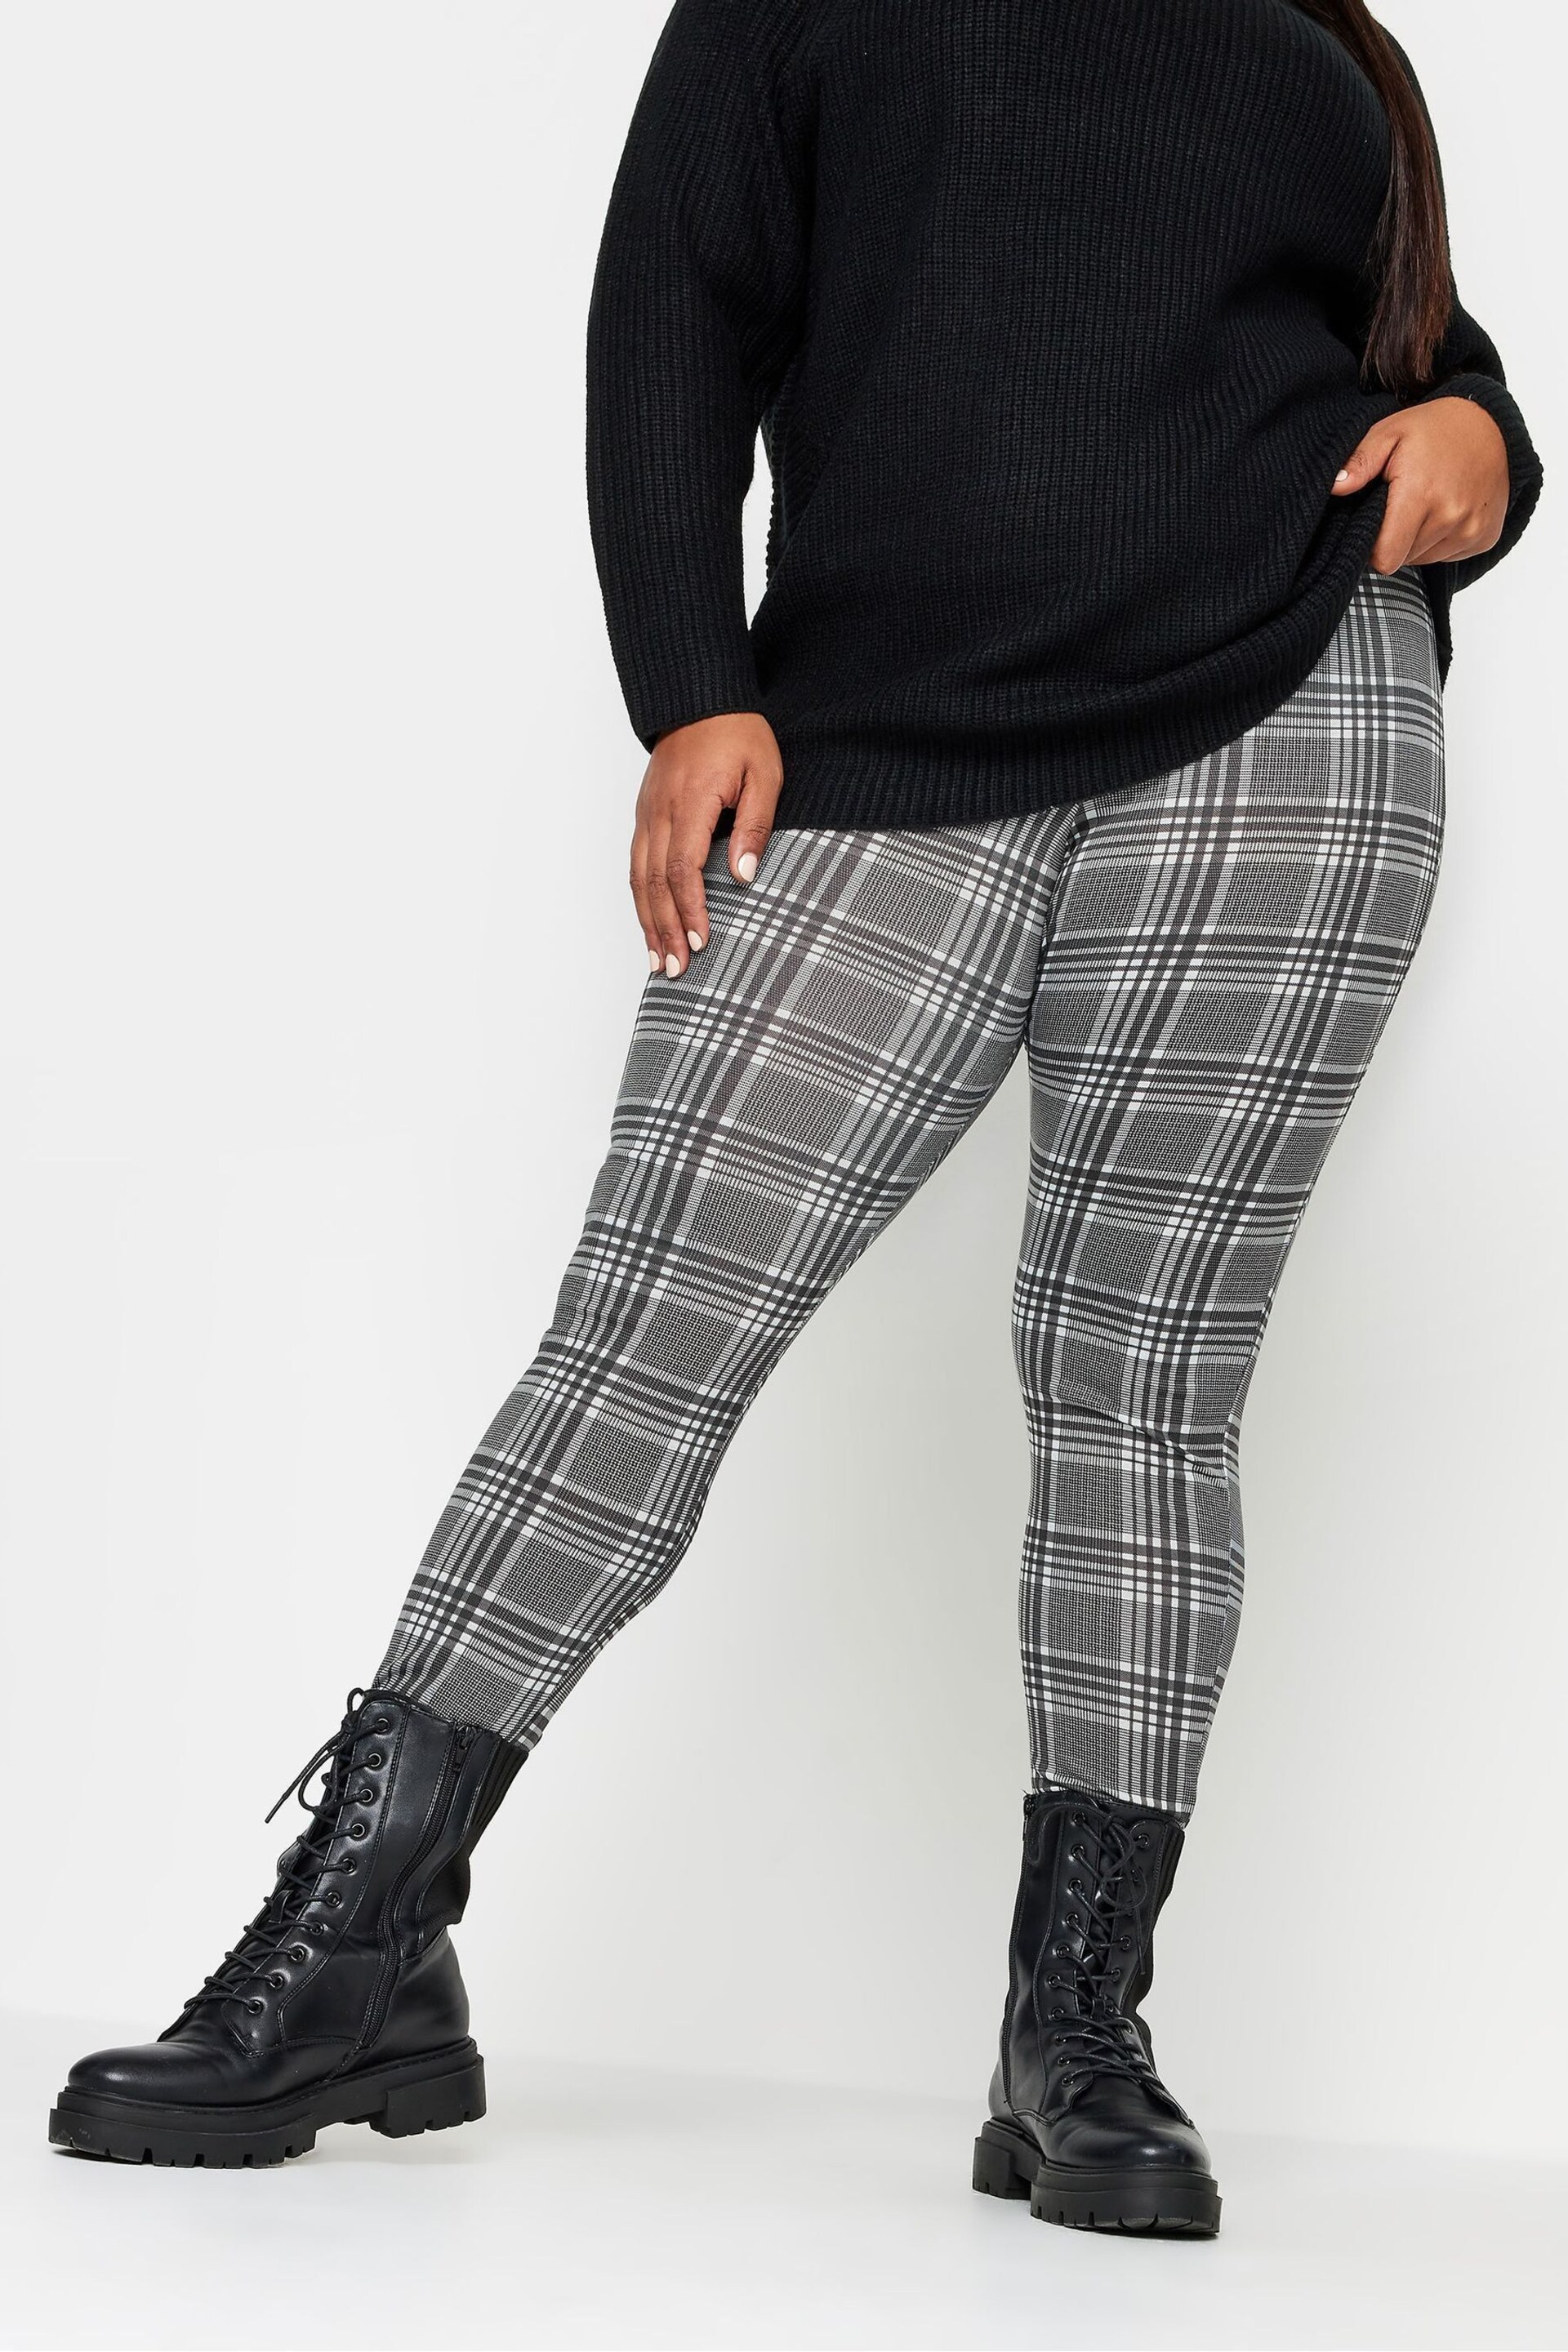 Yours Curve Grey Check Leggings - Image 1 of 4